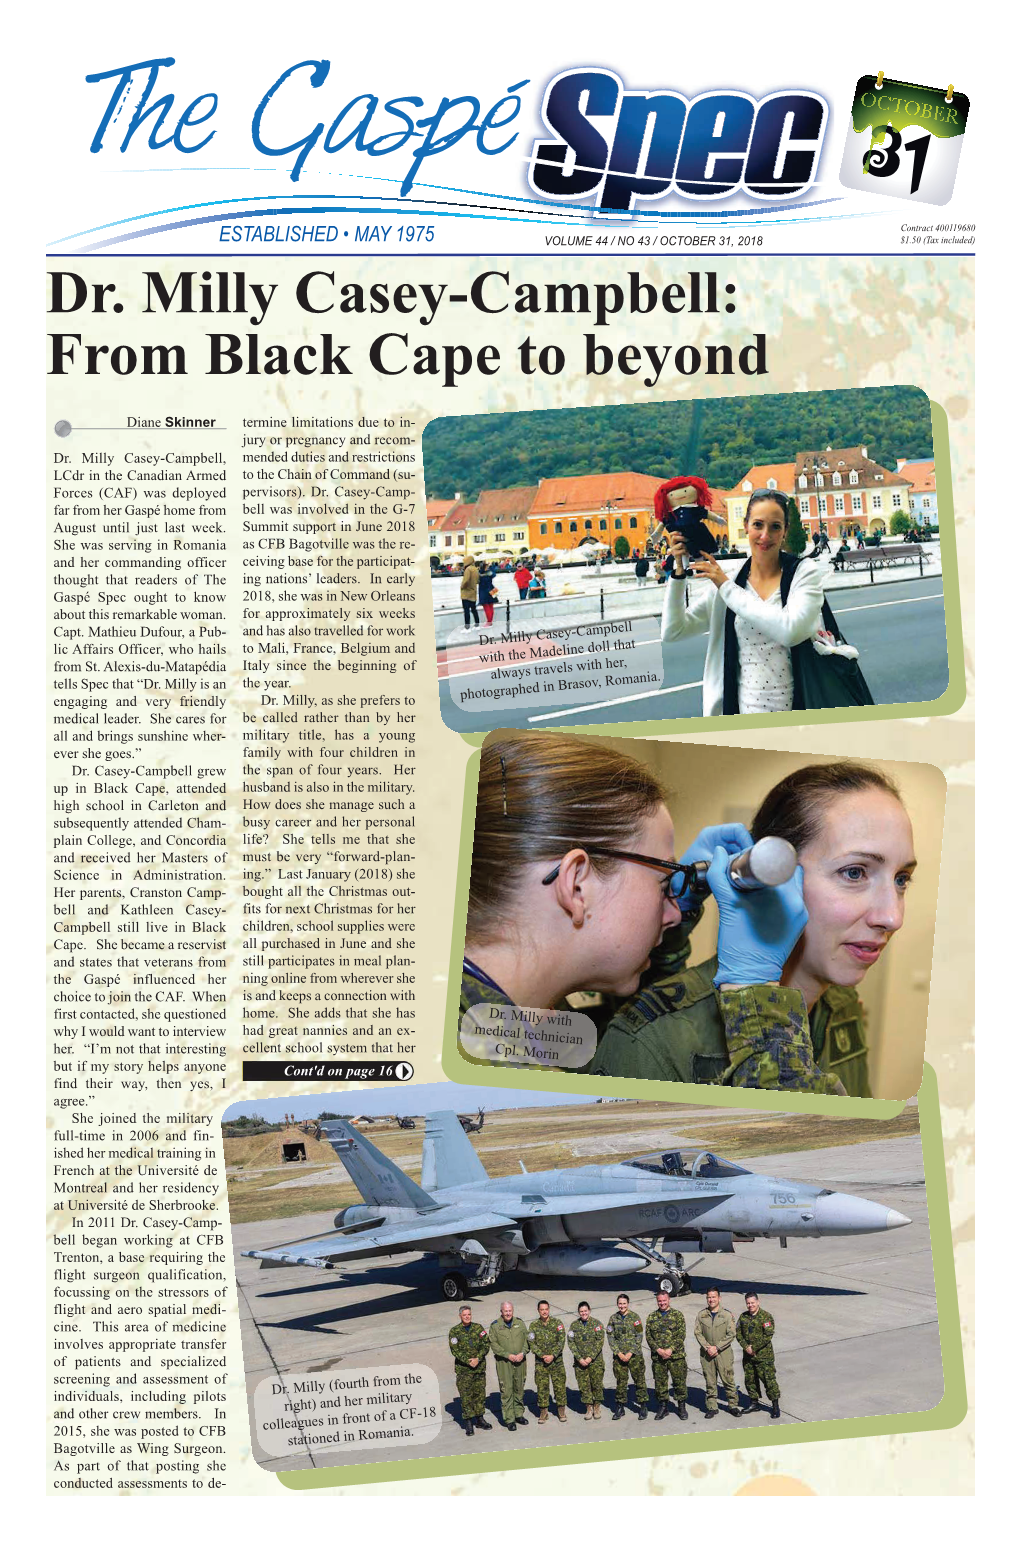 Dr. Milly Casey-Campbell: from Black Cape to Beyond